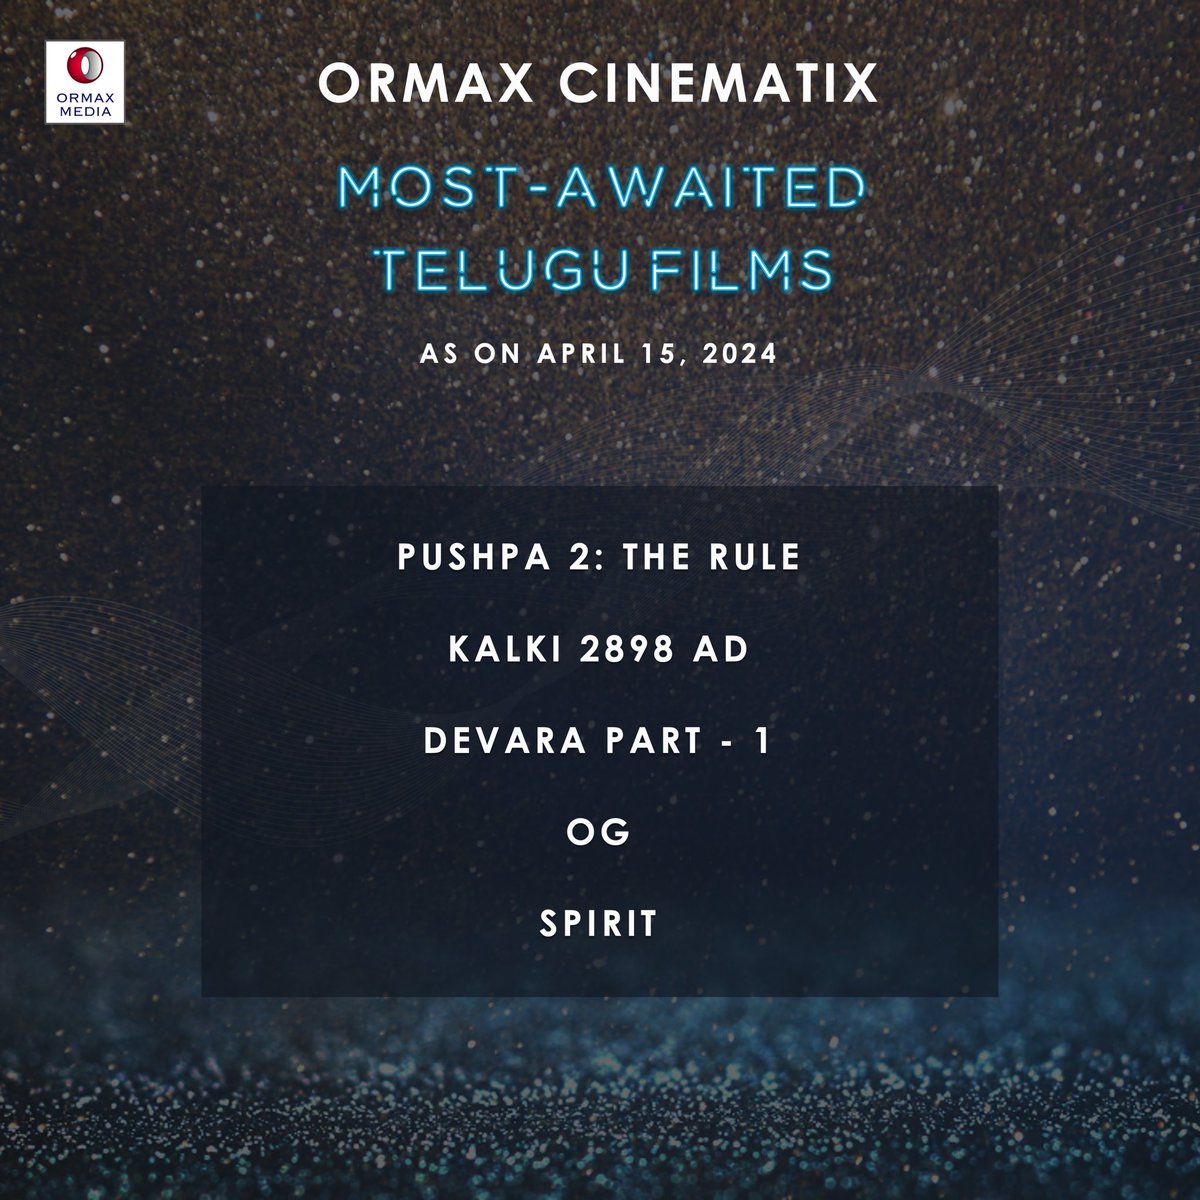 #OrmaxCinematix Most-awaited Telugu films, as on Apr 15, 2024 (only films releasing Jun 2024 onwards whose trailer has not released yet have been considered)